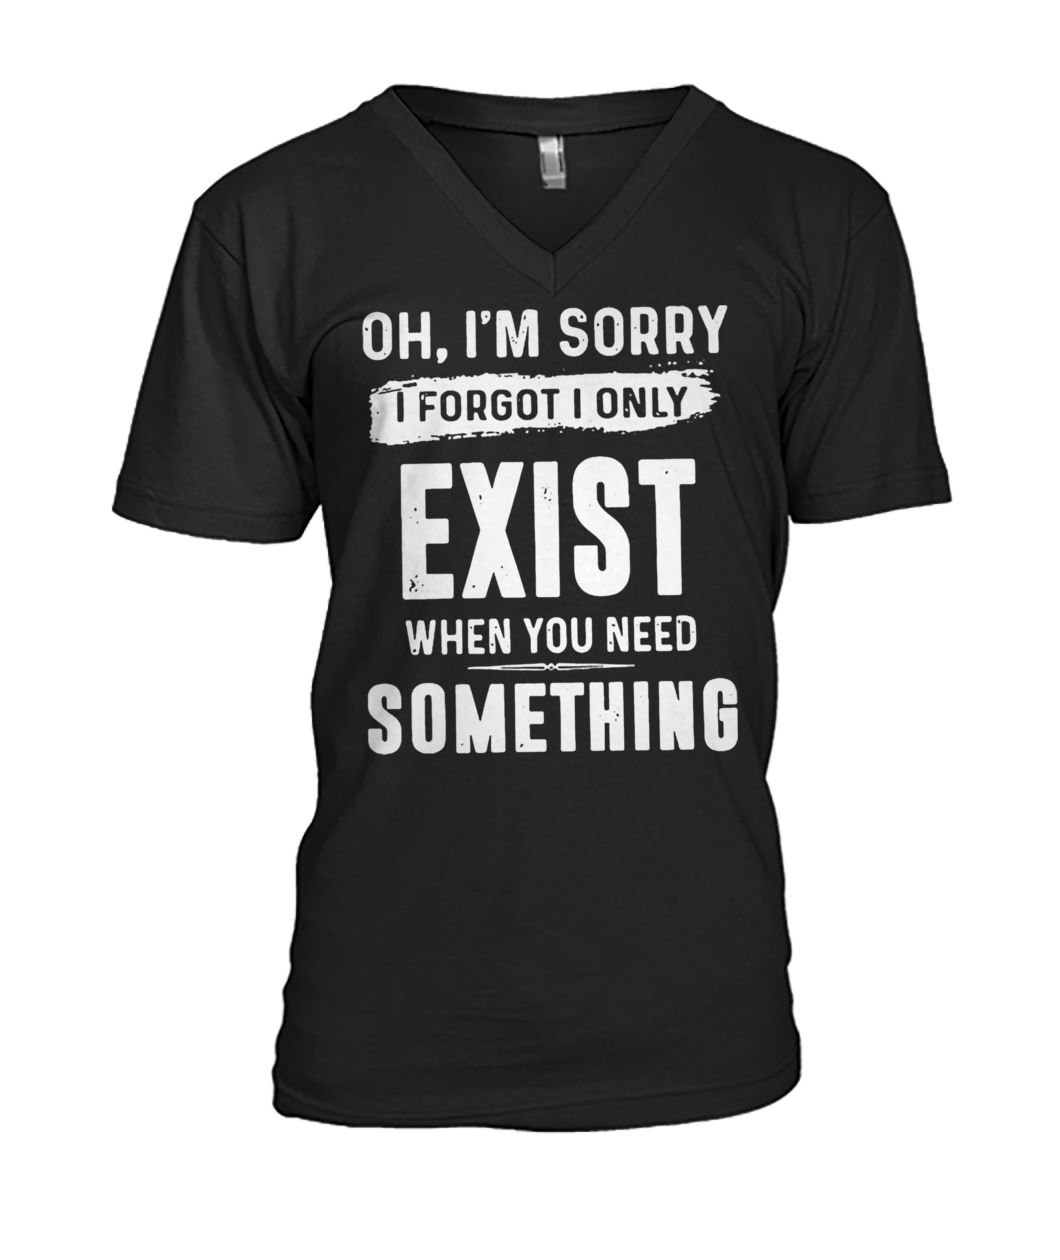 Oh I'm sorry I forgot I only exist when you need something mens v-neck